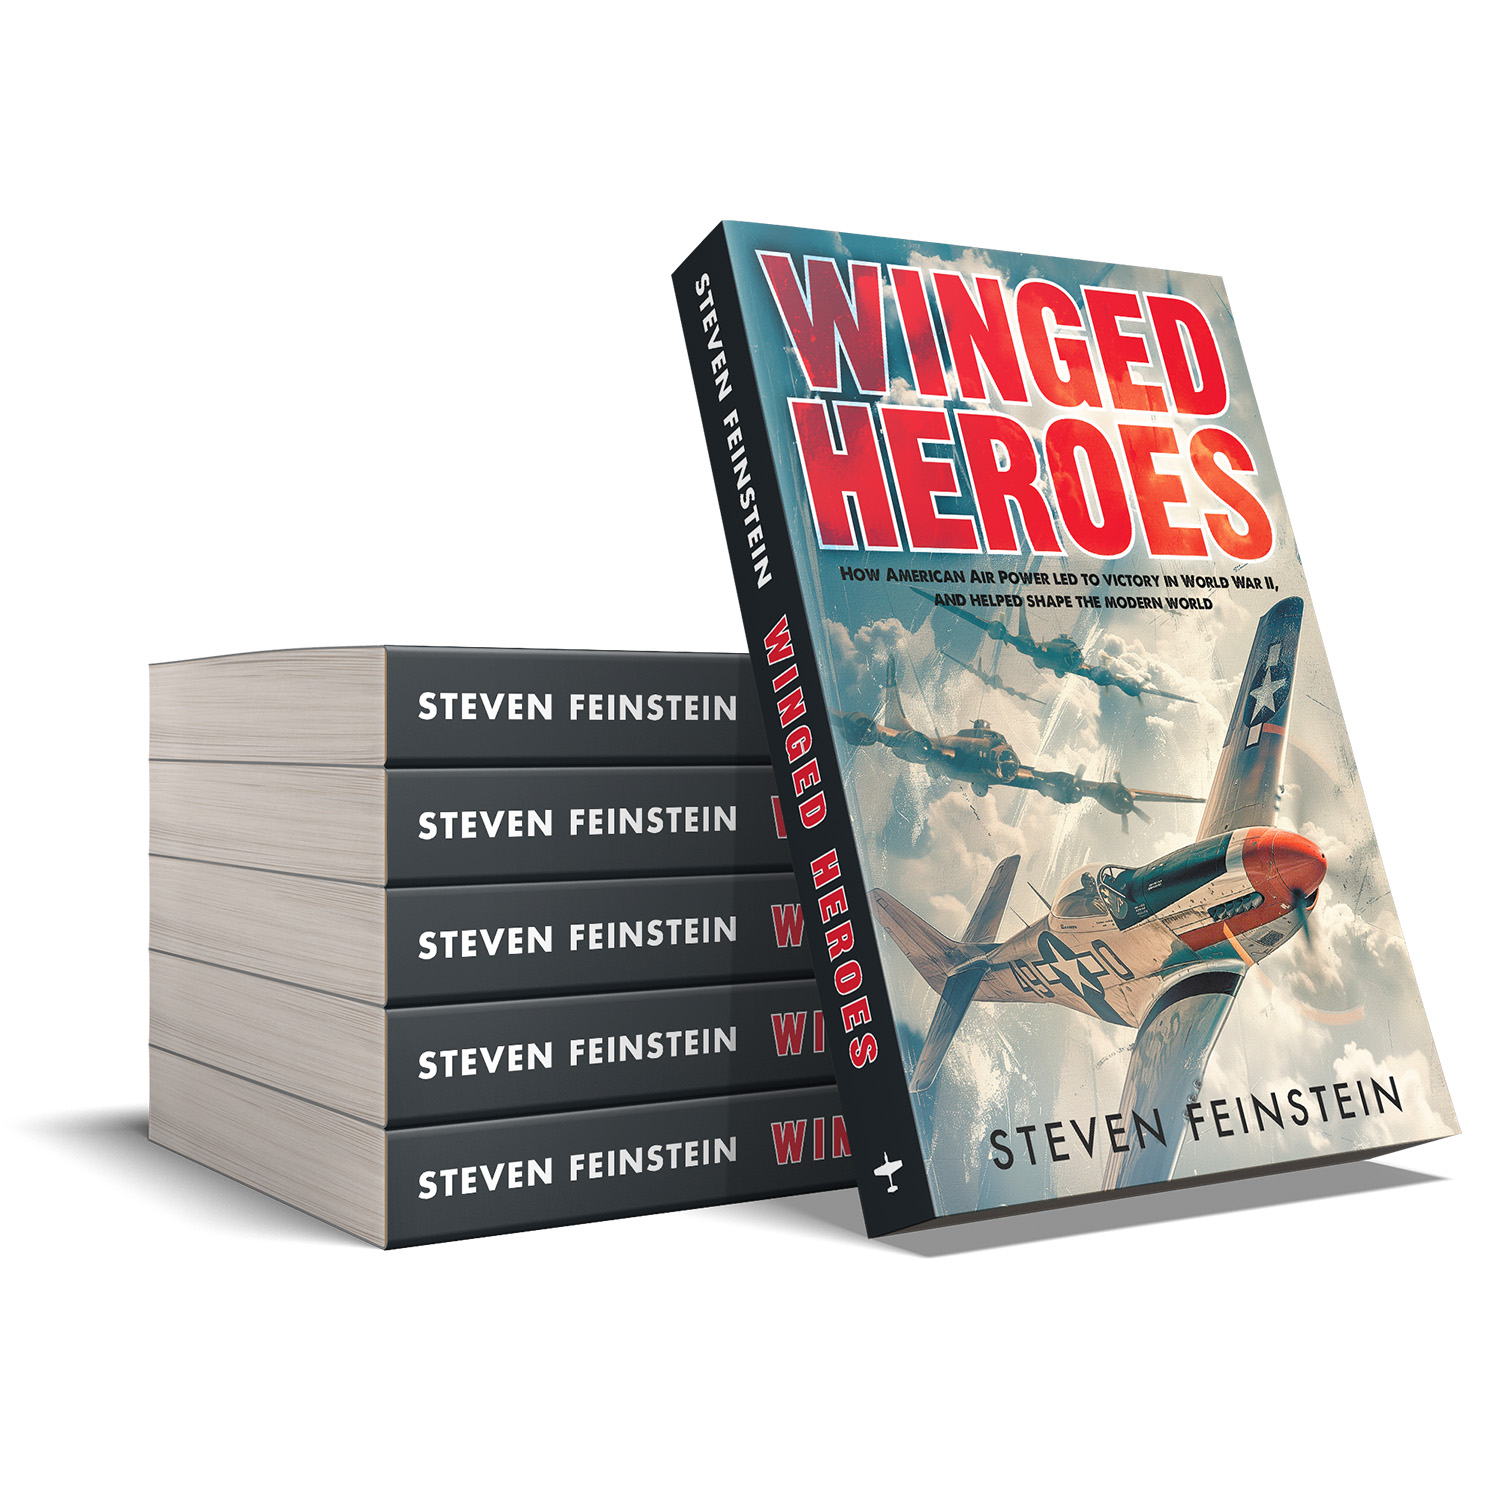 'Winged Heroes' is a detailed exploration of US airpower in WW2. The author is Steve Feinstein. The cover design and interior formatting are by Mark Thomas of coverness.com. To find out more about my book design services, please visit www.coverness.com.